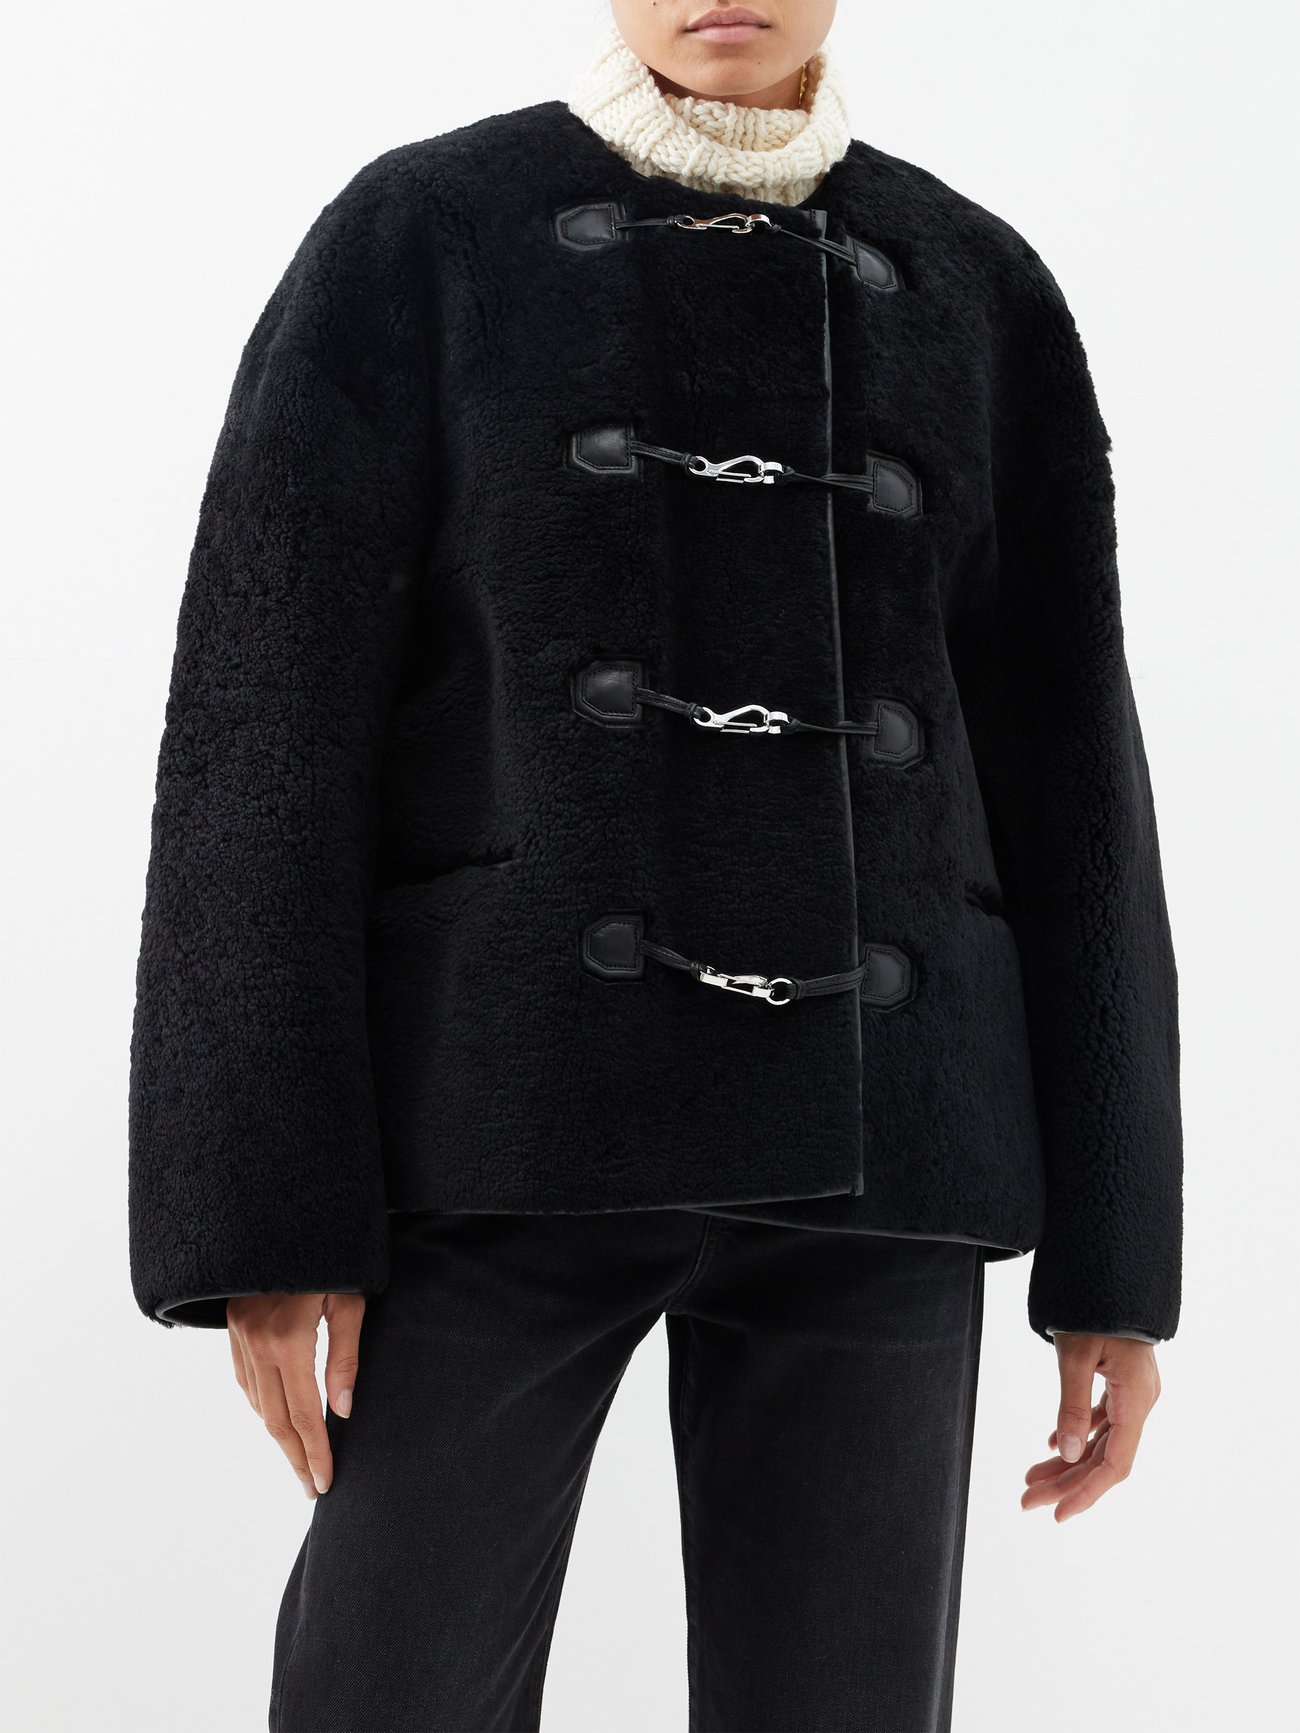 Trending Winter Coats 2023 2024 - Silver carabiner clasps bring a contemporary verve to Toteme's boxy black jacket, crafted from luxuriously plush teddy shearling and finished with leather trims.